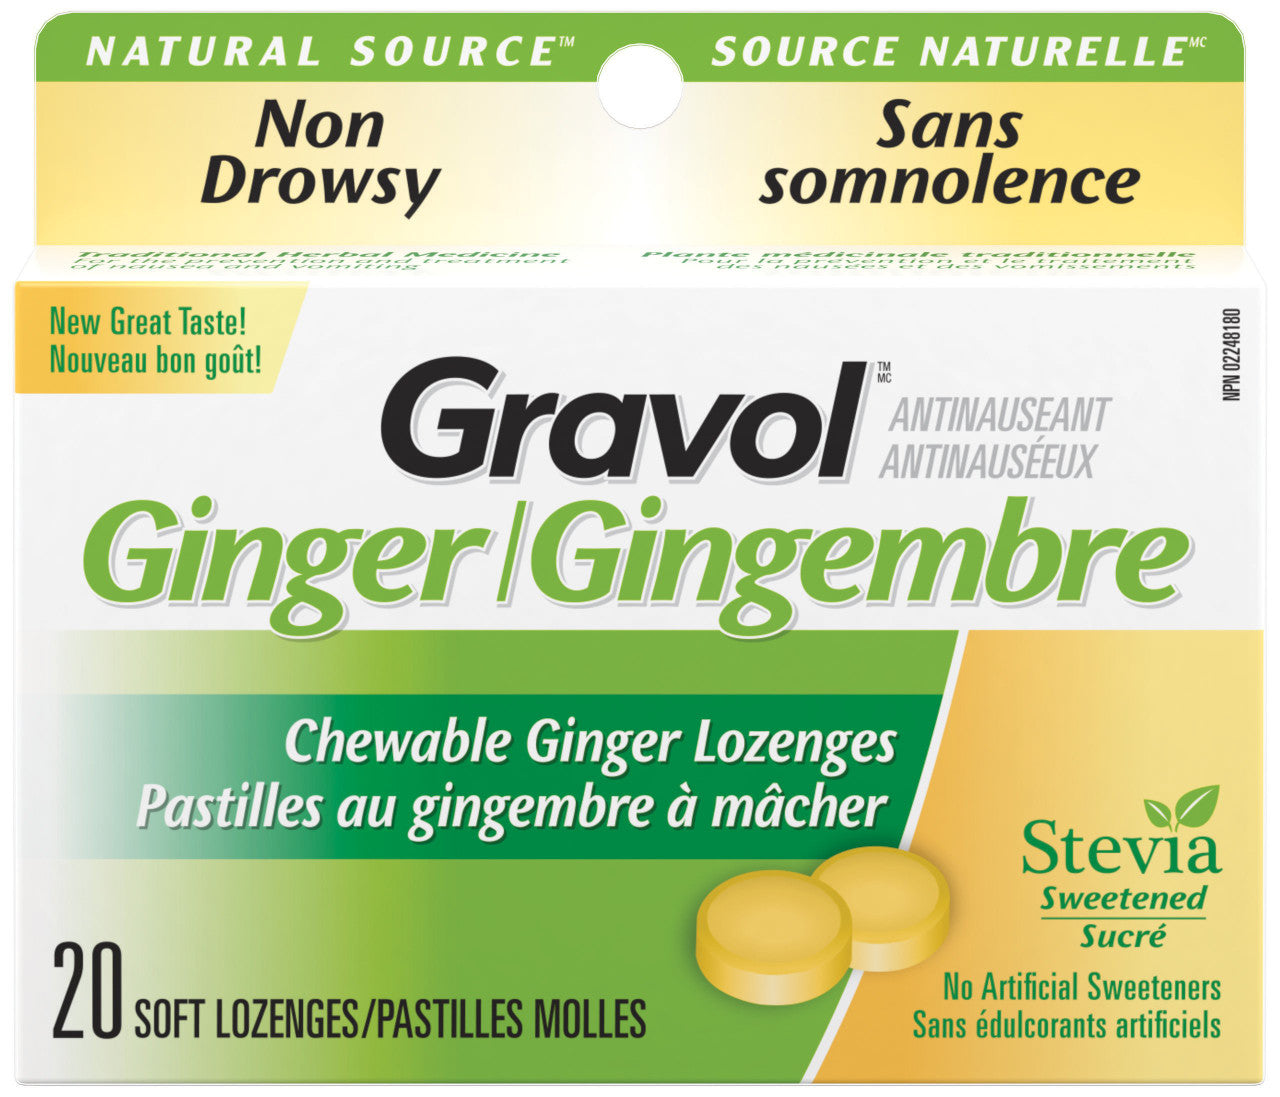 Certified Organic Ginger GRAVOL (20 Chewable Lozenges)500mg Antinauseant for NAUSEA, VOMITING & MOTION SICKNESS